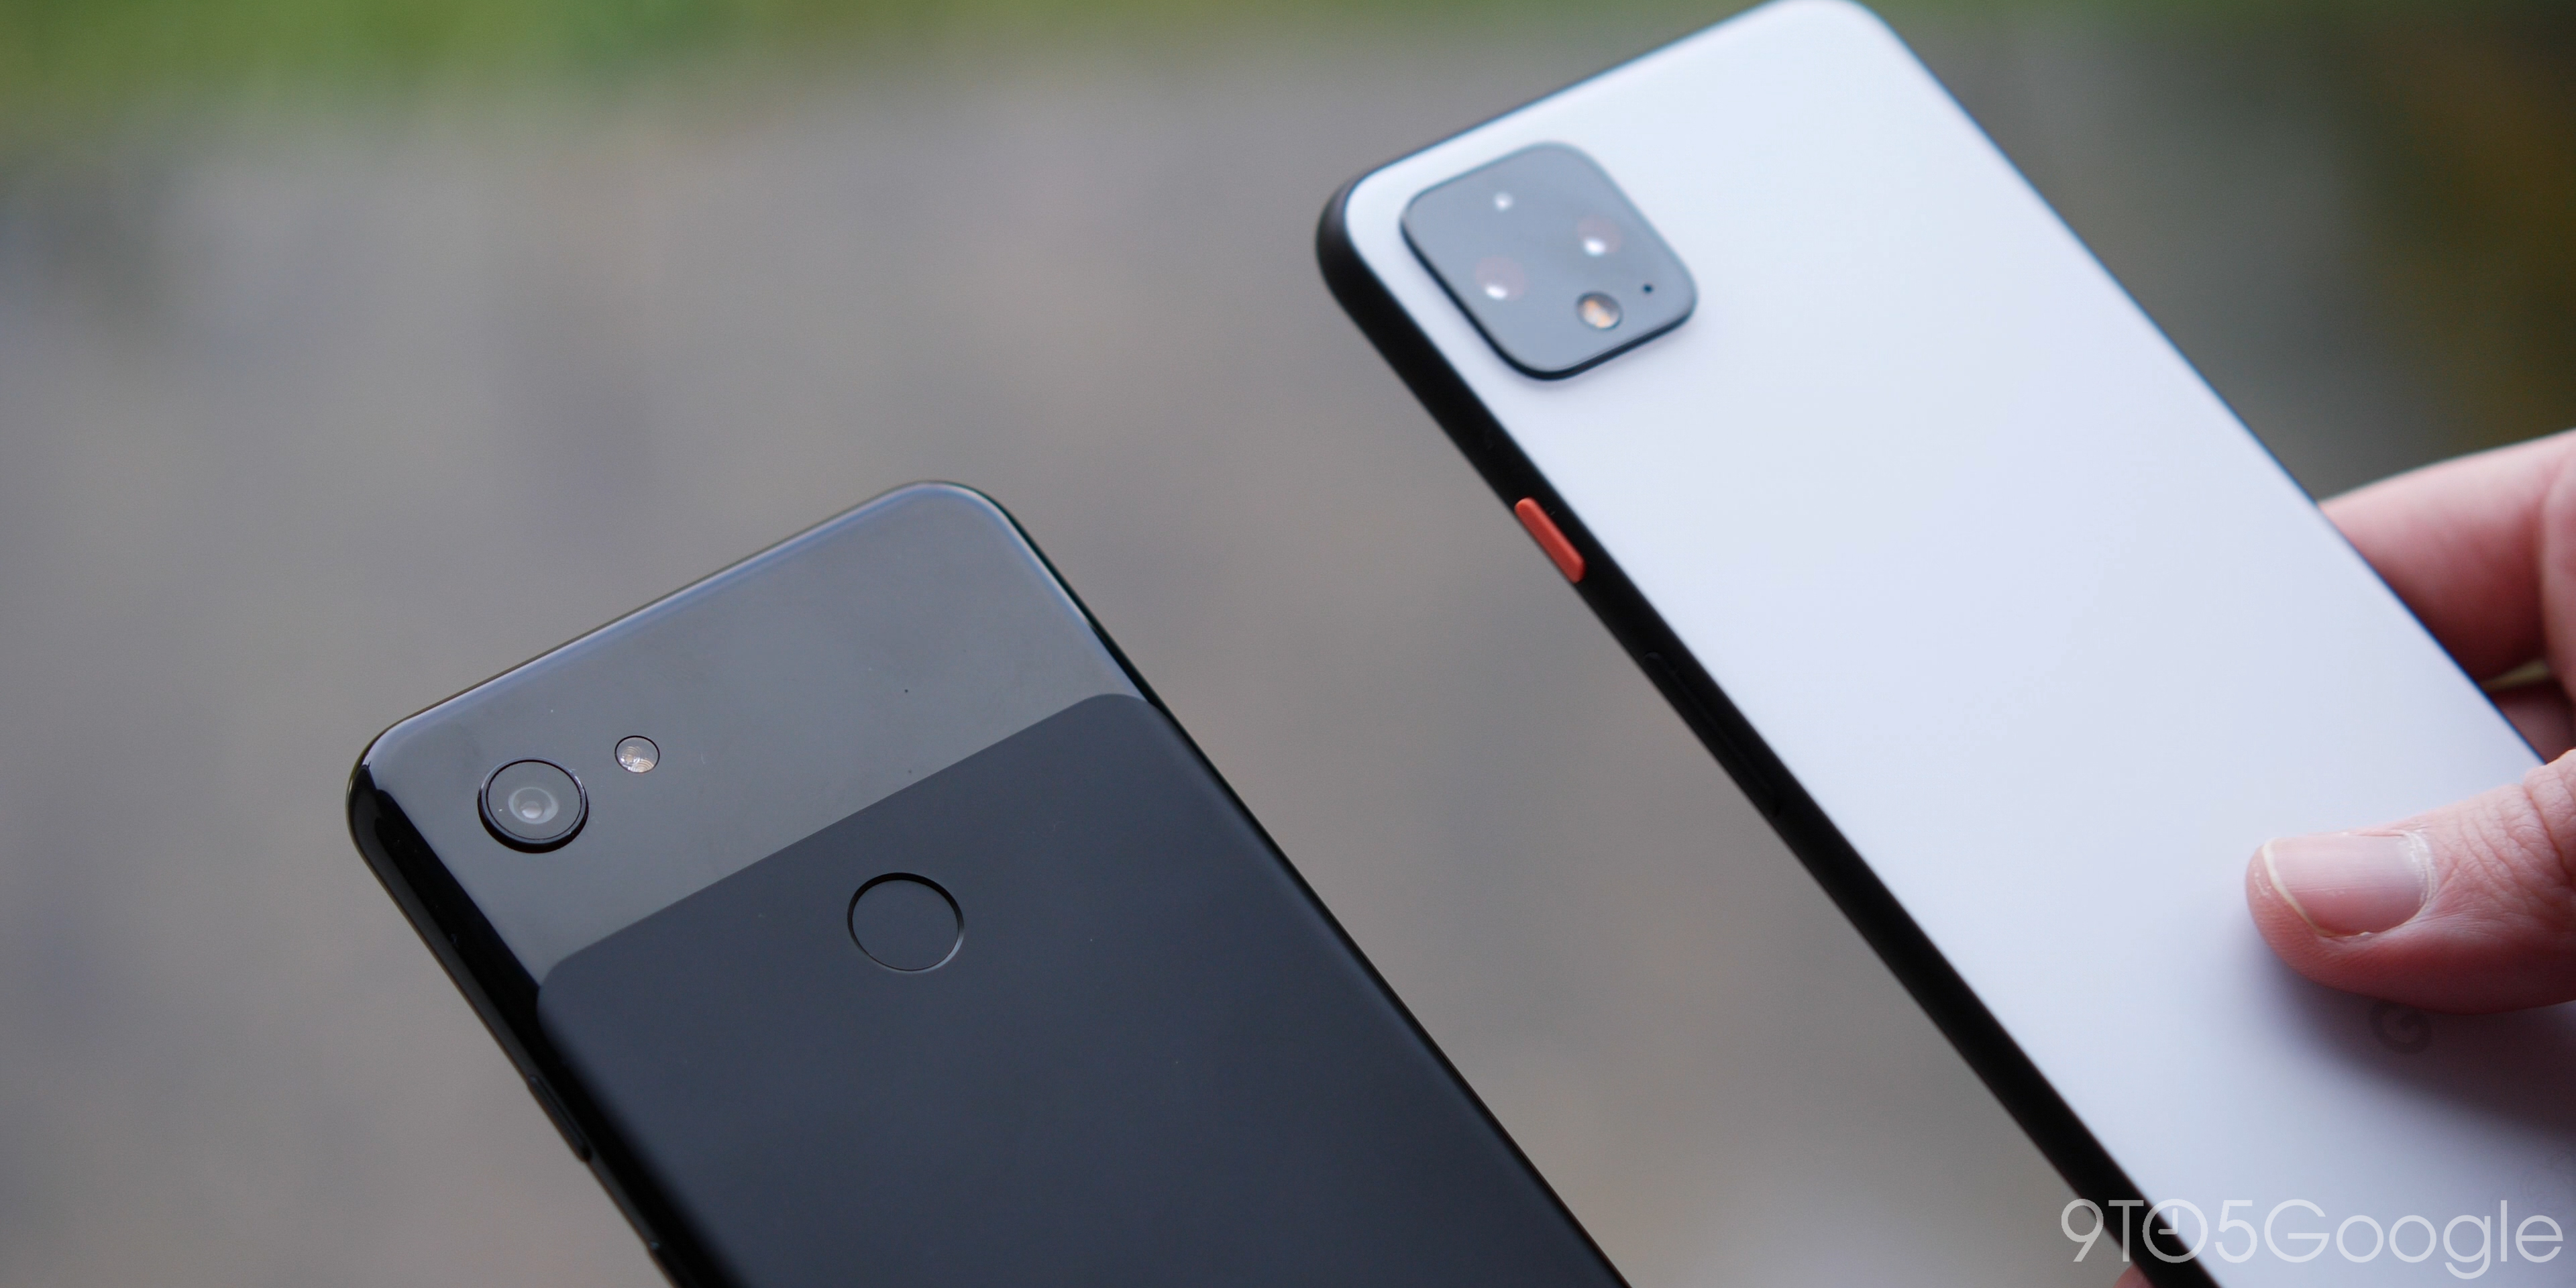 Pixel 3a re-review: The best of Google in a budget package